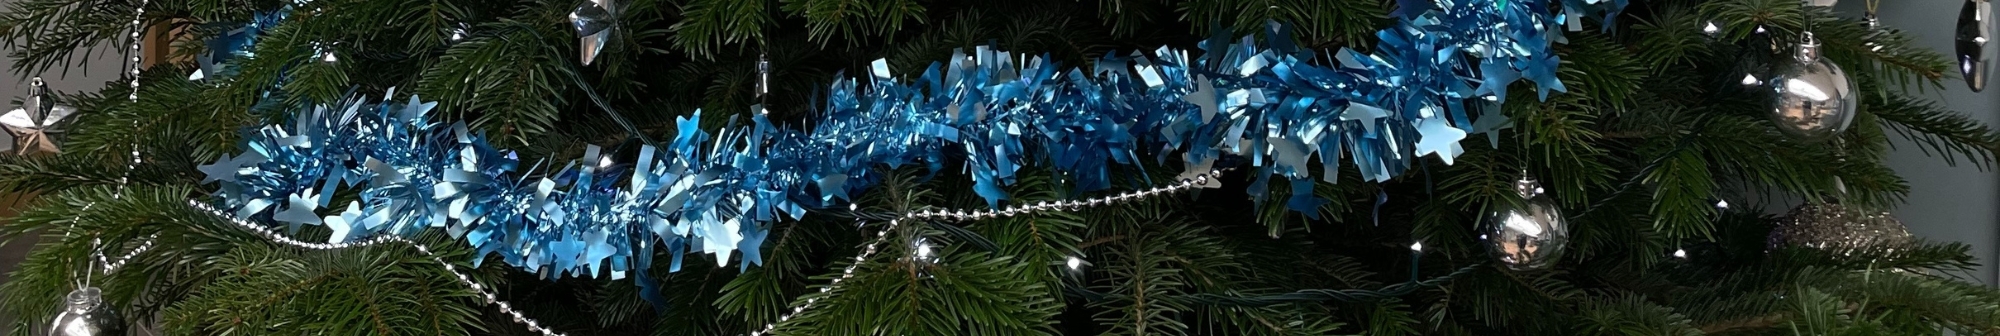 christmas-tree-decorated-with-blue-tinsel-silver-beads-and-baubles